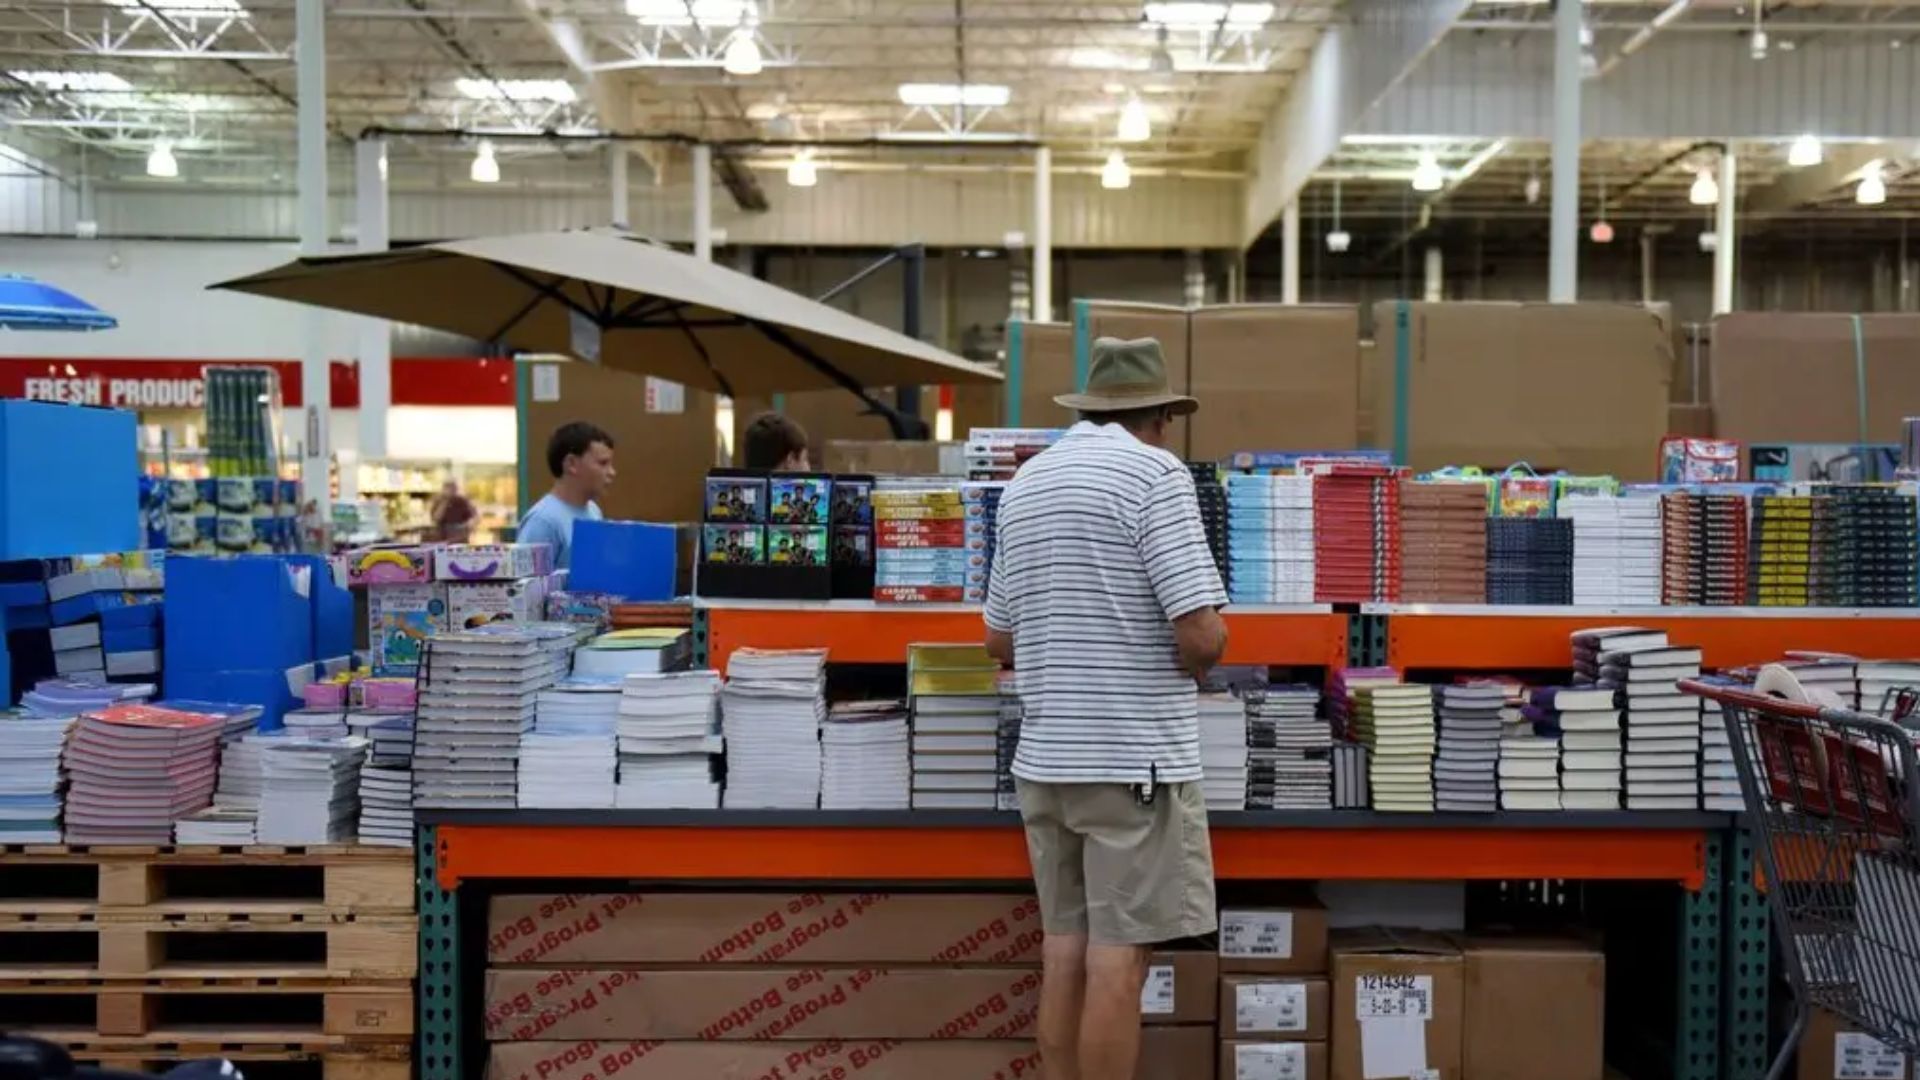 Costco Plans to Stop Selling Books Year-Round